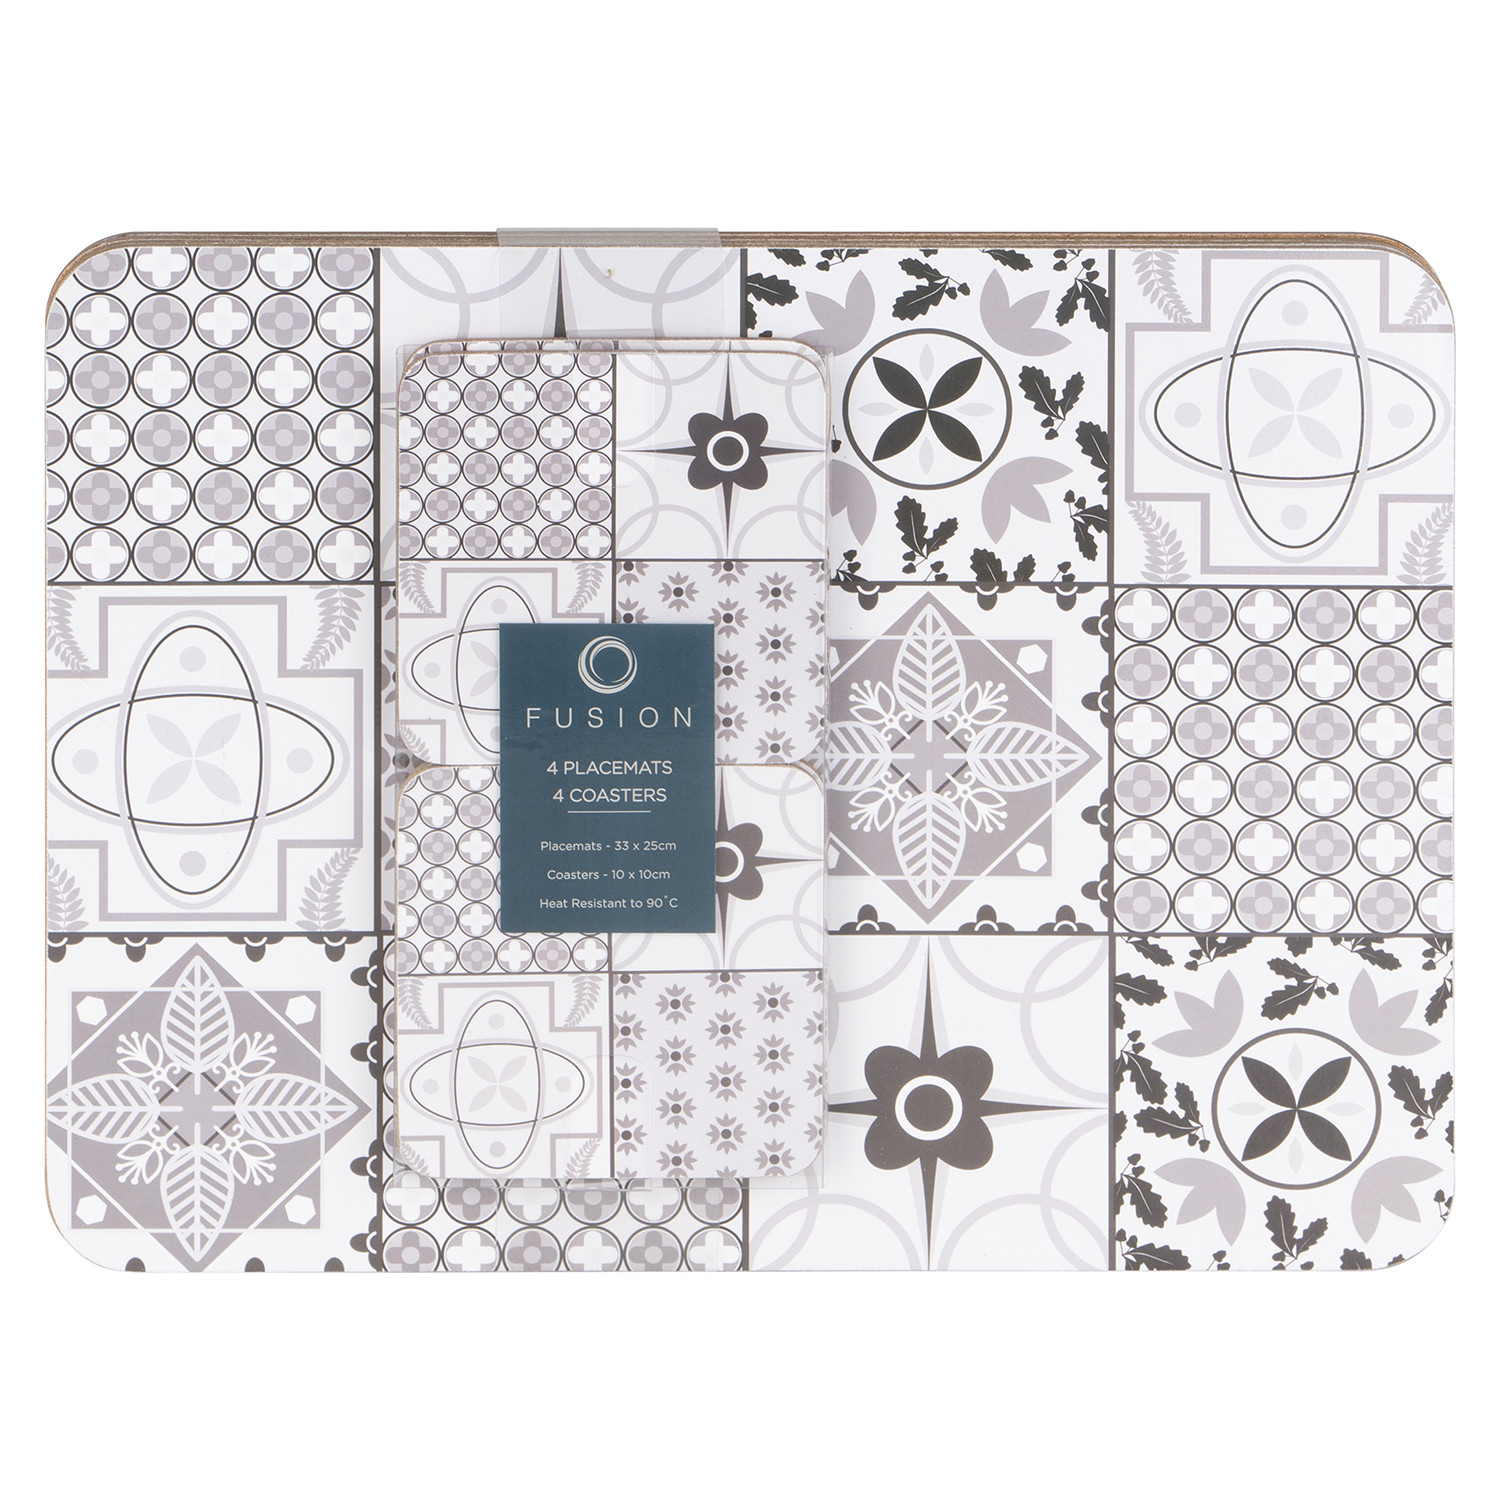 Impress Tile 8 Pack Placemats and Coasters Set Image 1